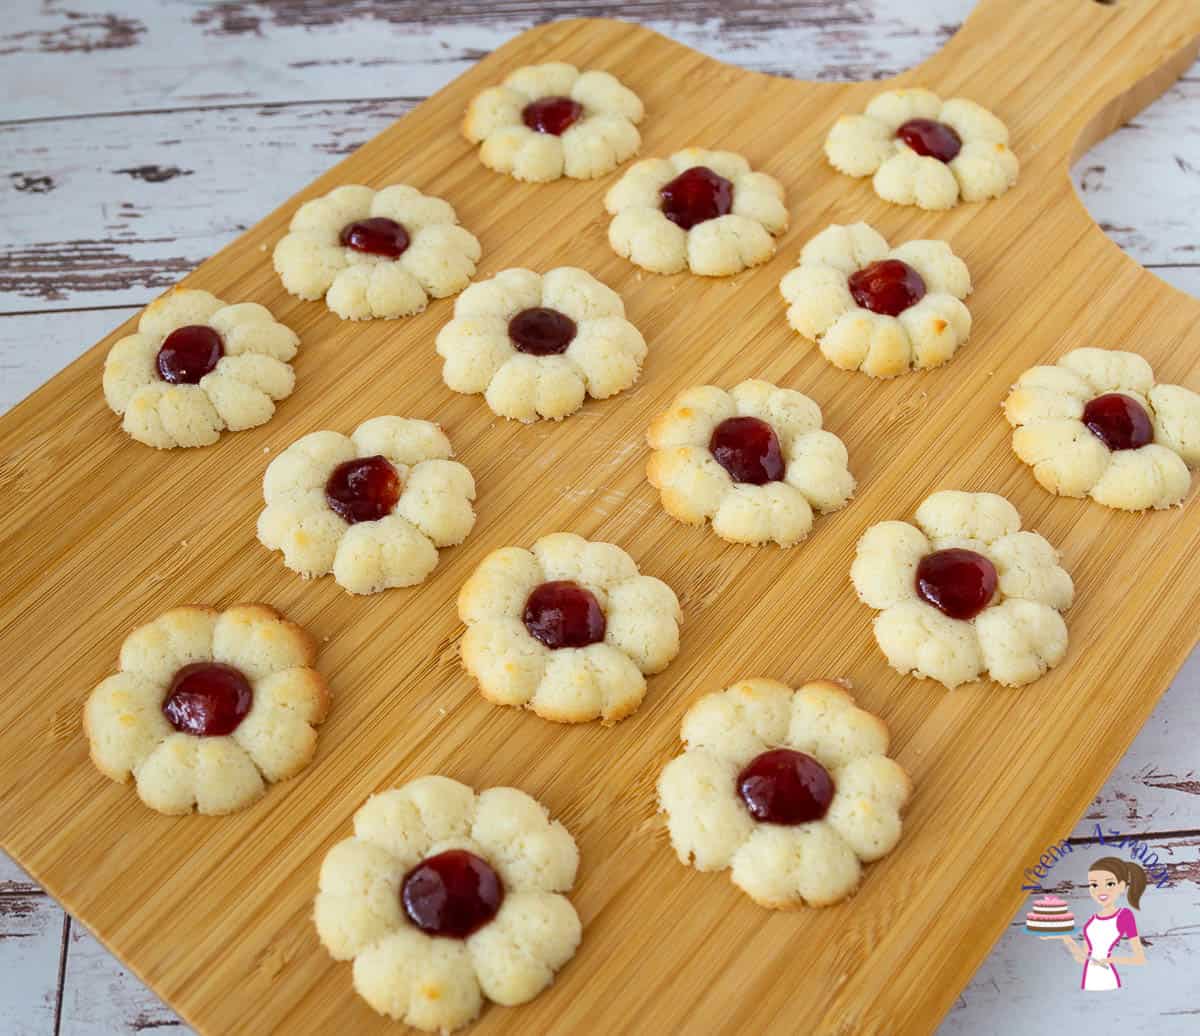 jam cookies on a wooden board